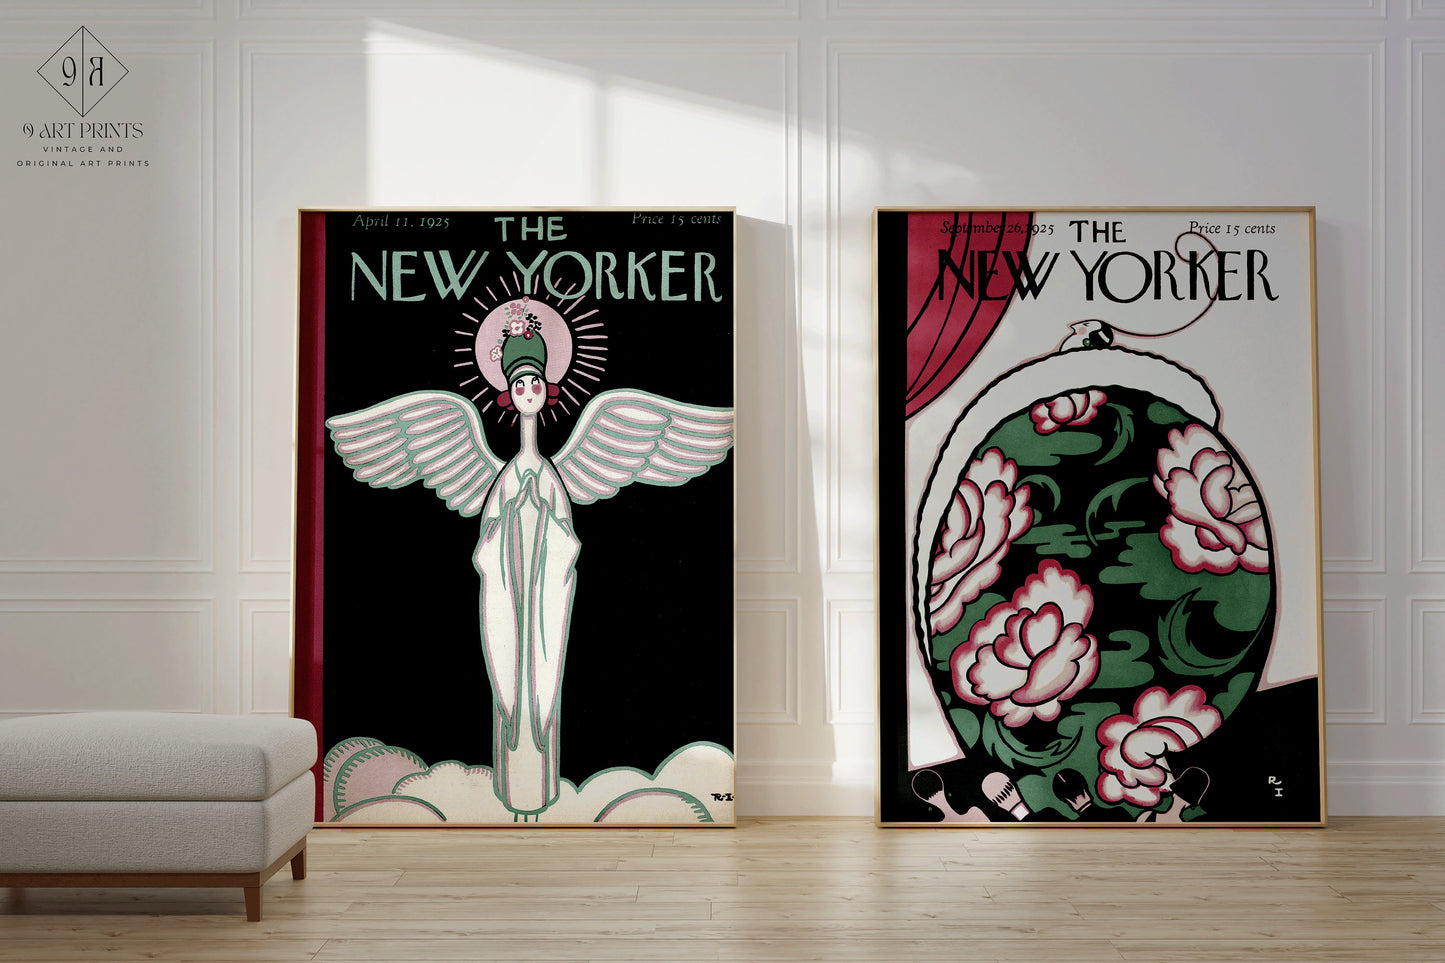 Set of 2 New Yorker Magazine Cover Print Black Green Red Retro Vintage Style Aesthetic Art Print Home Office Decor Ready to hang Framed Gift